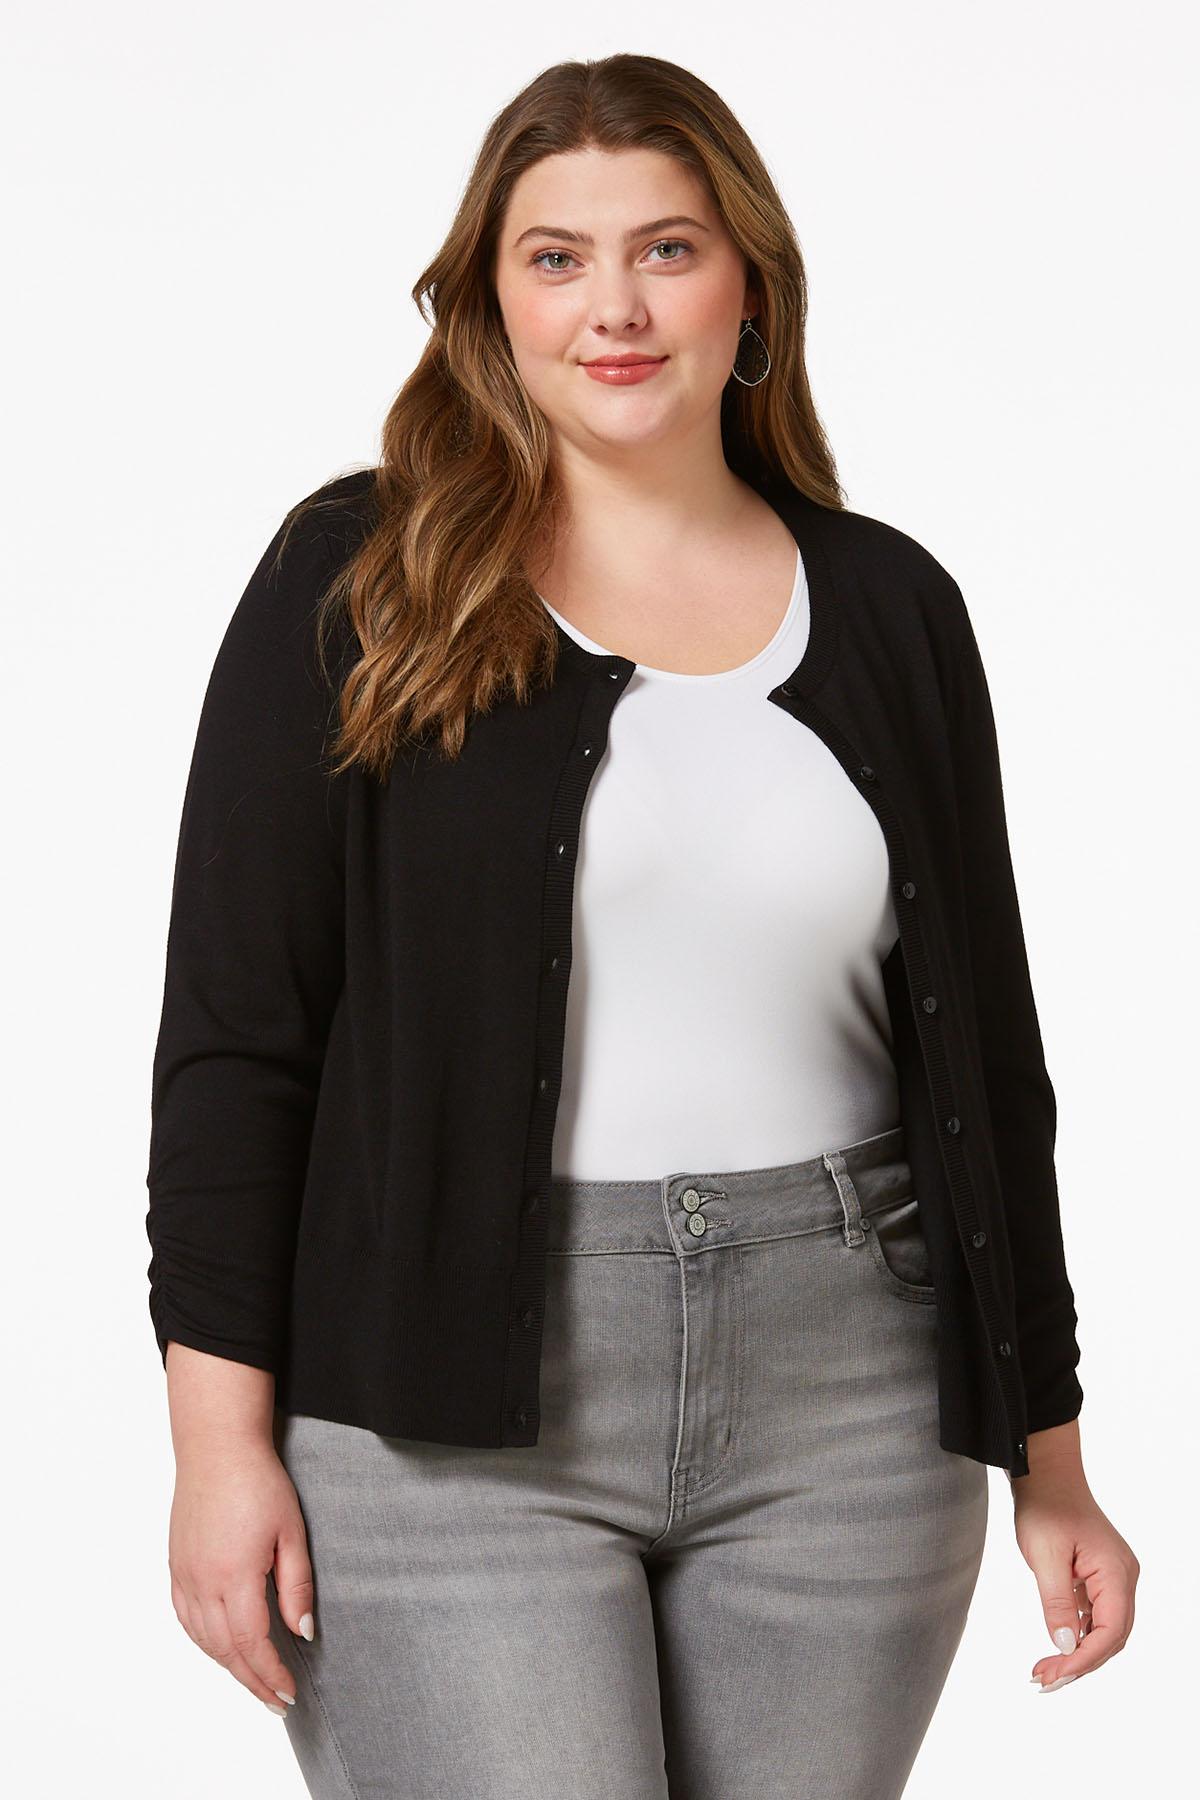 Cato Fashions  Cato Plus Size Ruched Sleeve Cardigan